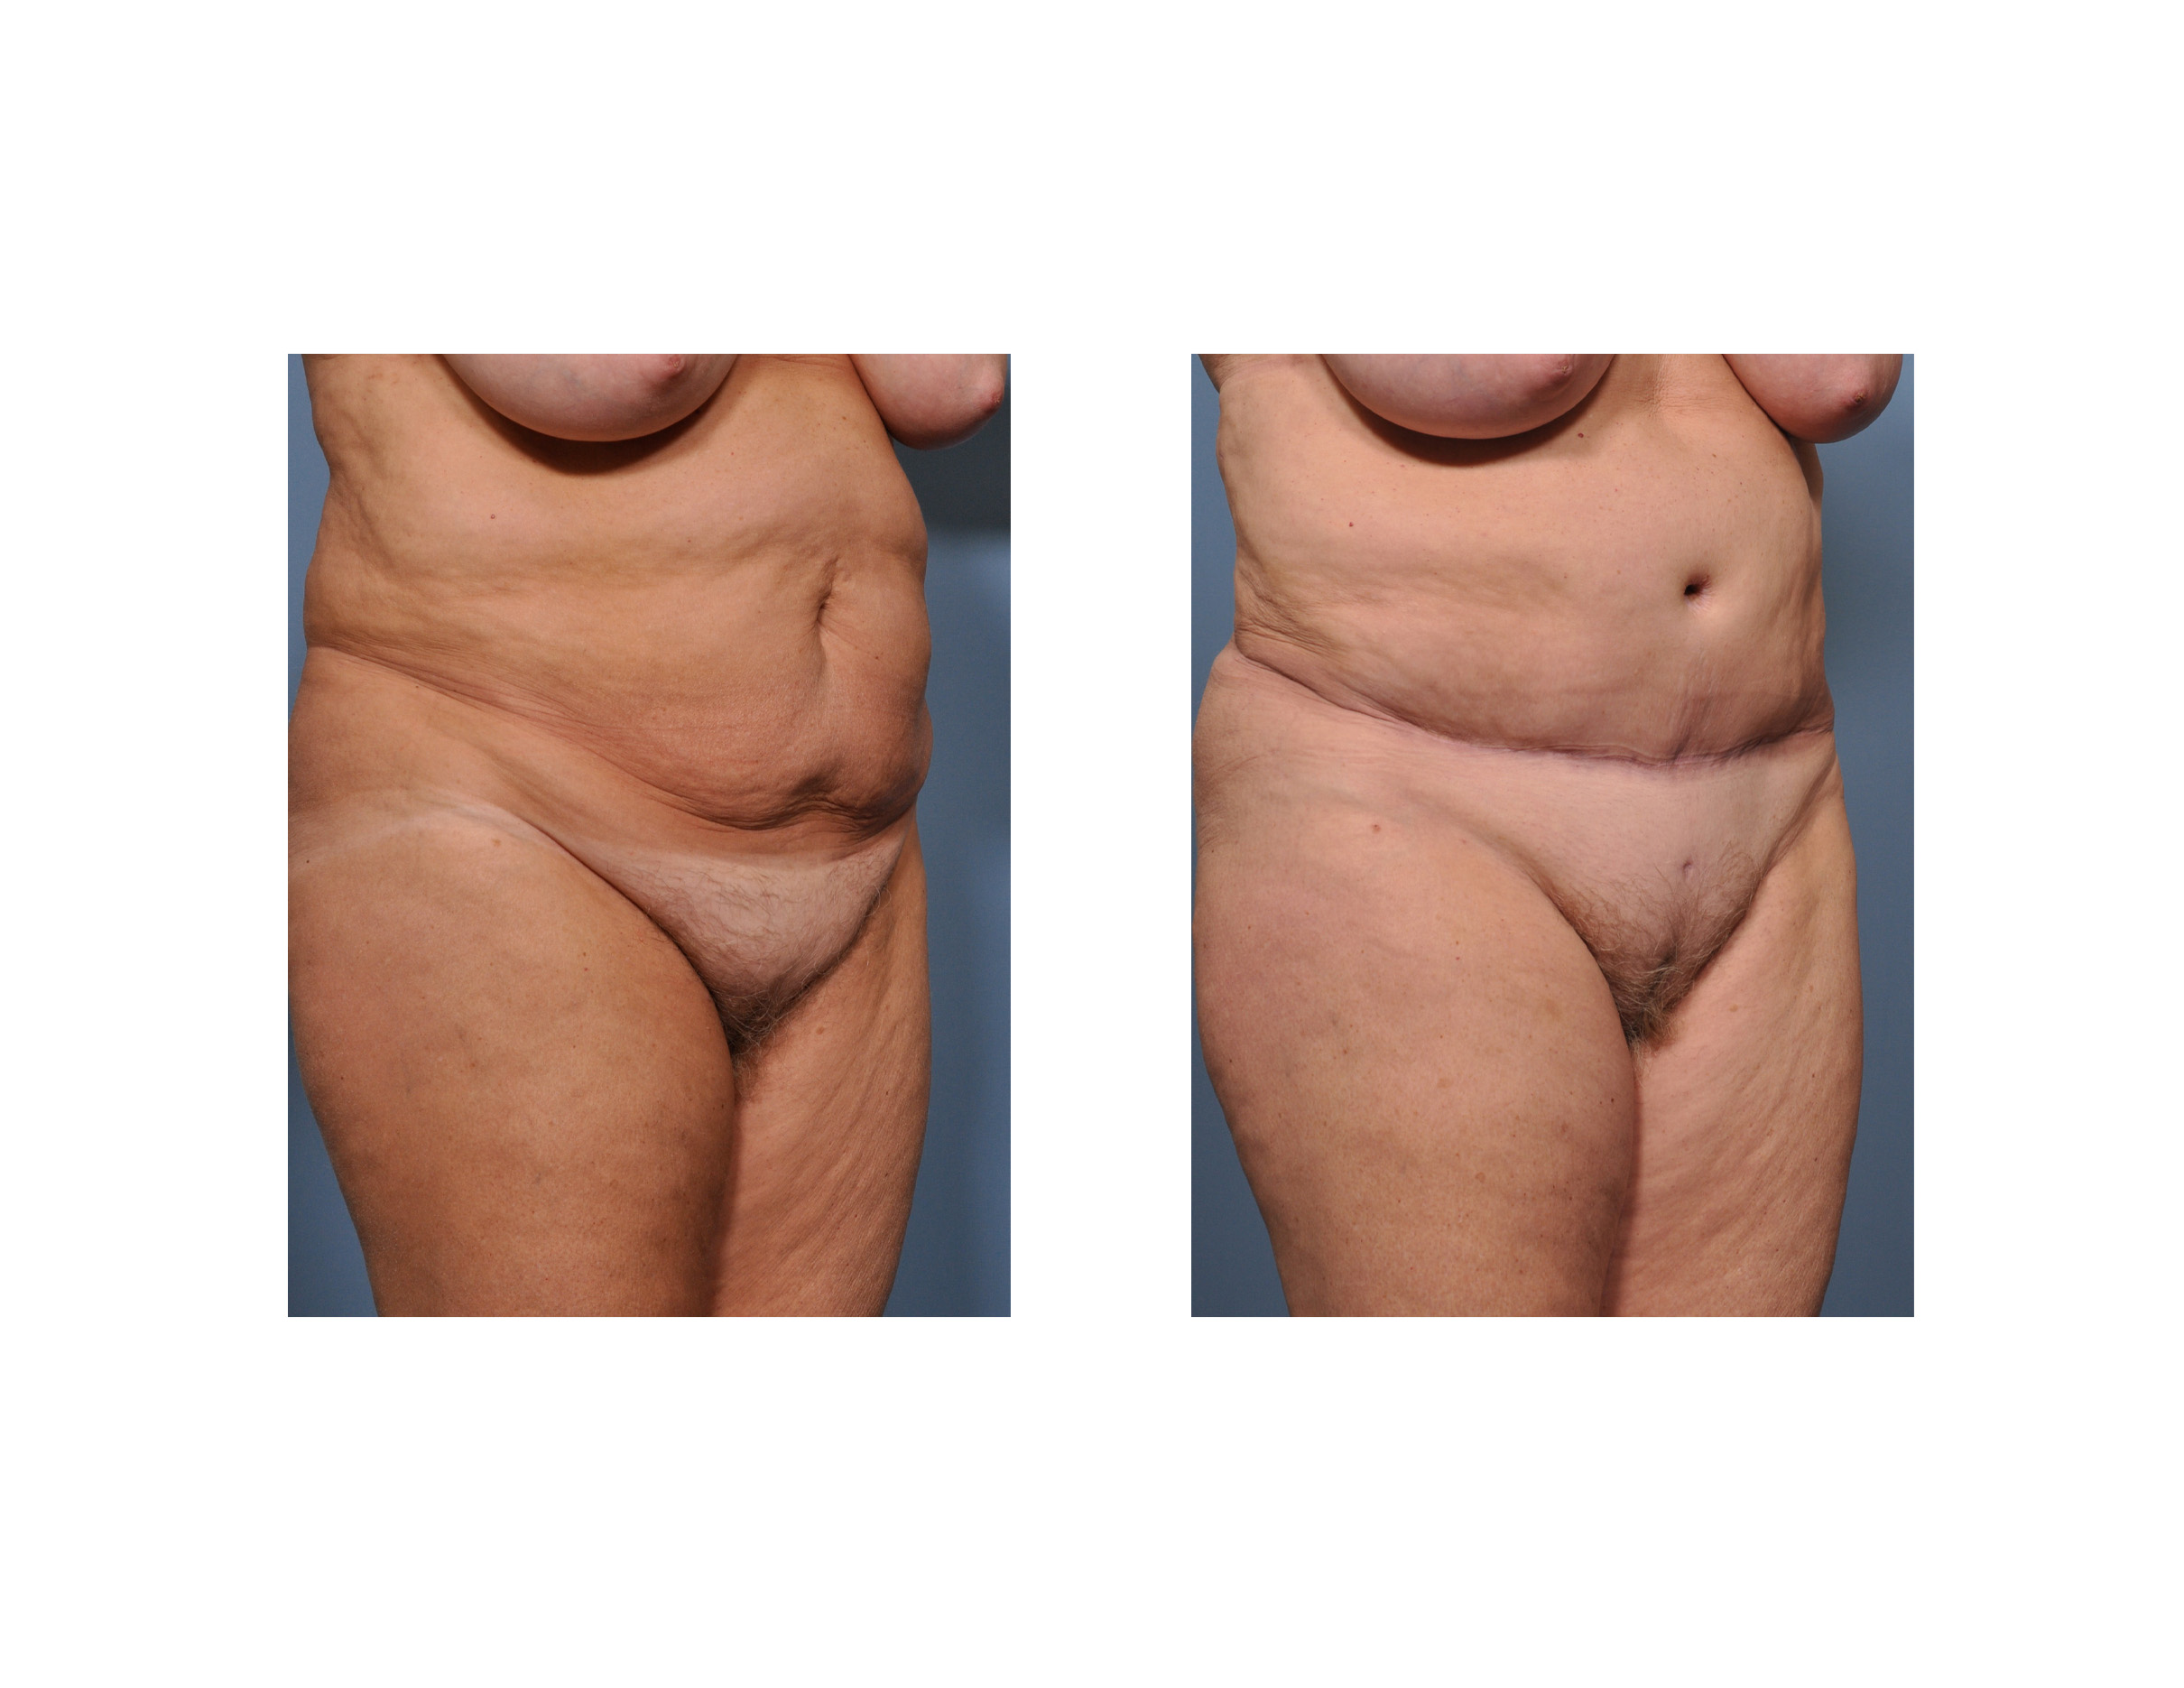 How long does the swelling last after a tummy tuck? - Quora